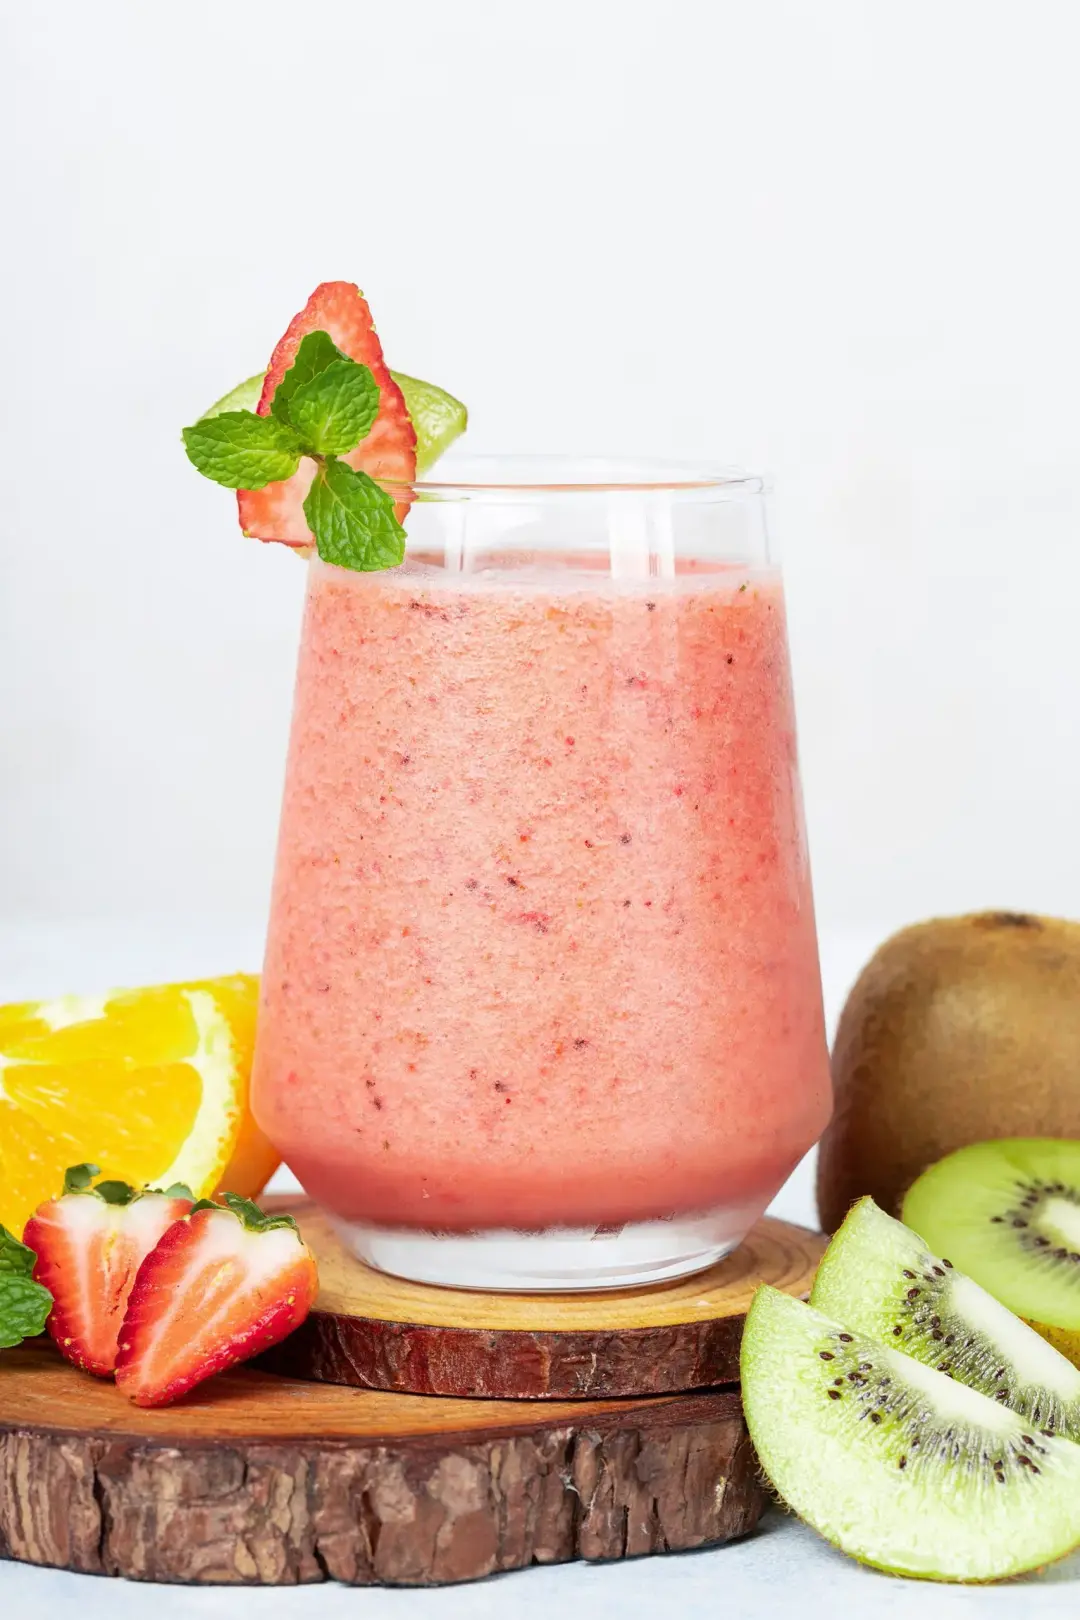 Strawberry Kiwi Smoothie Recipe: A Tangy and Sweet Berry Treat